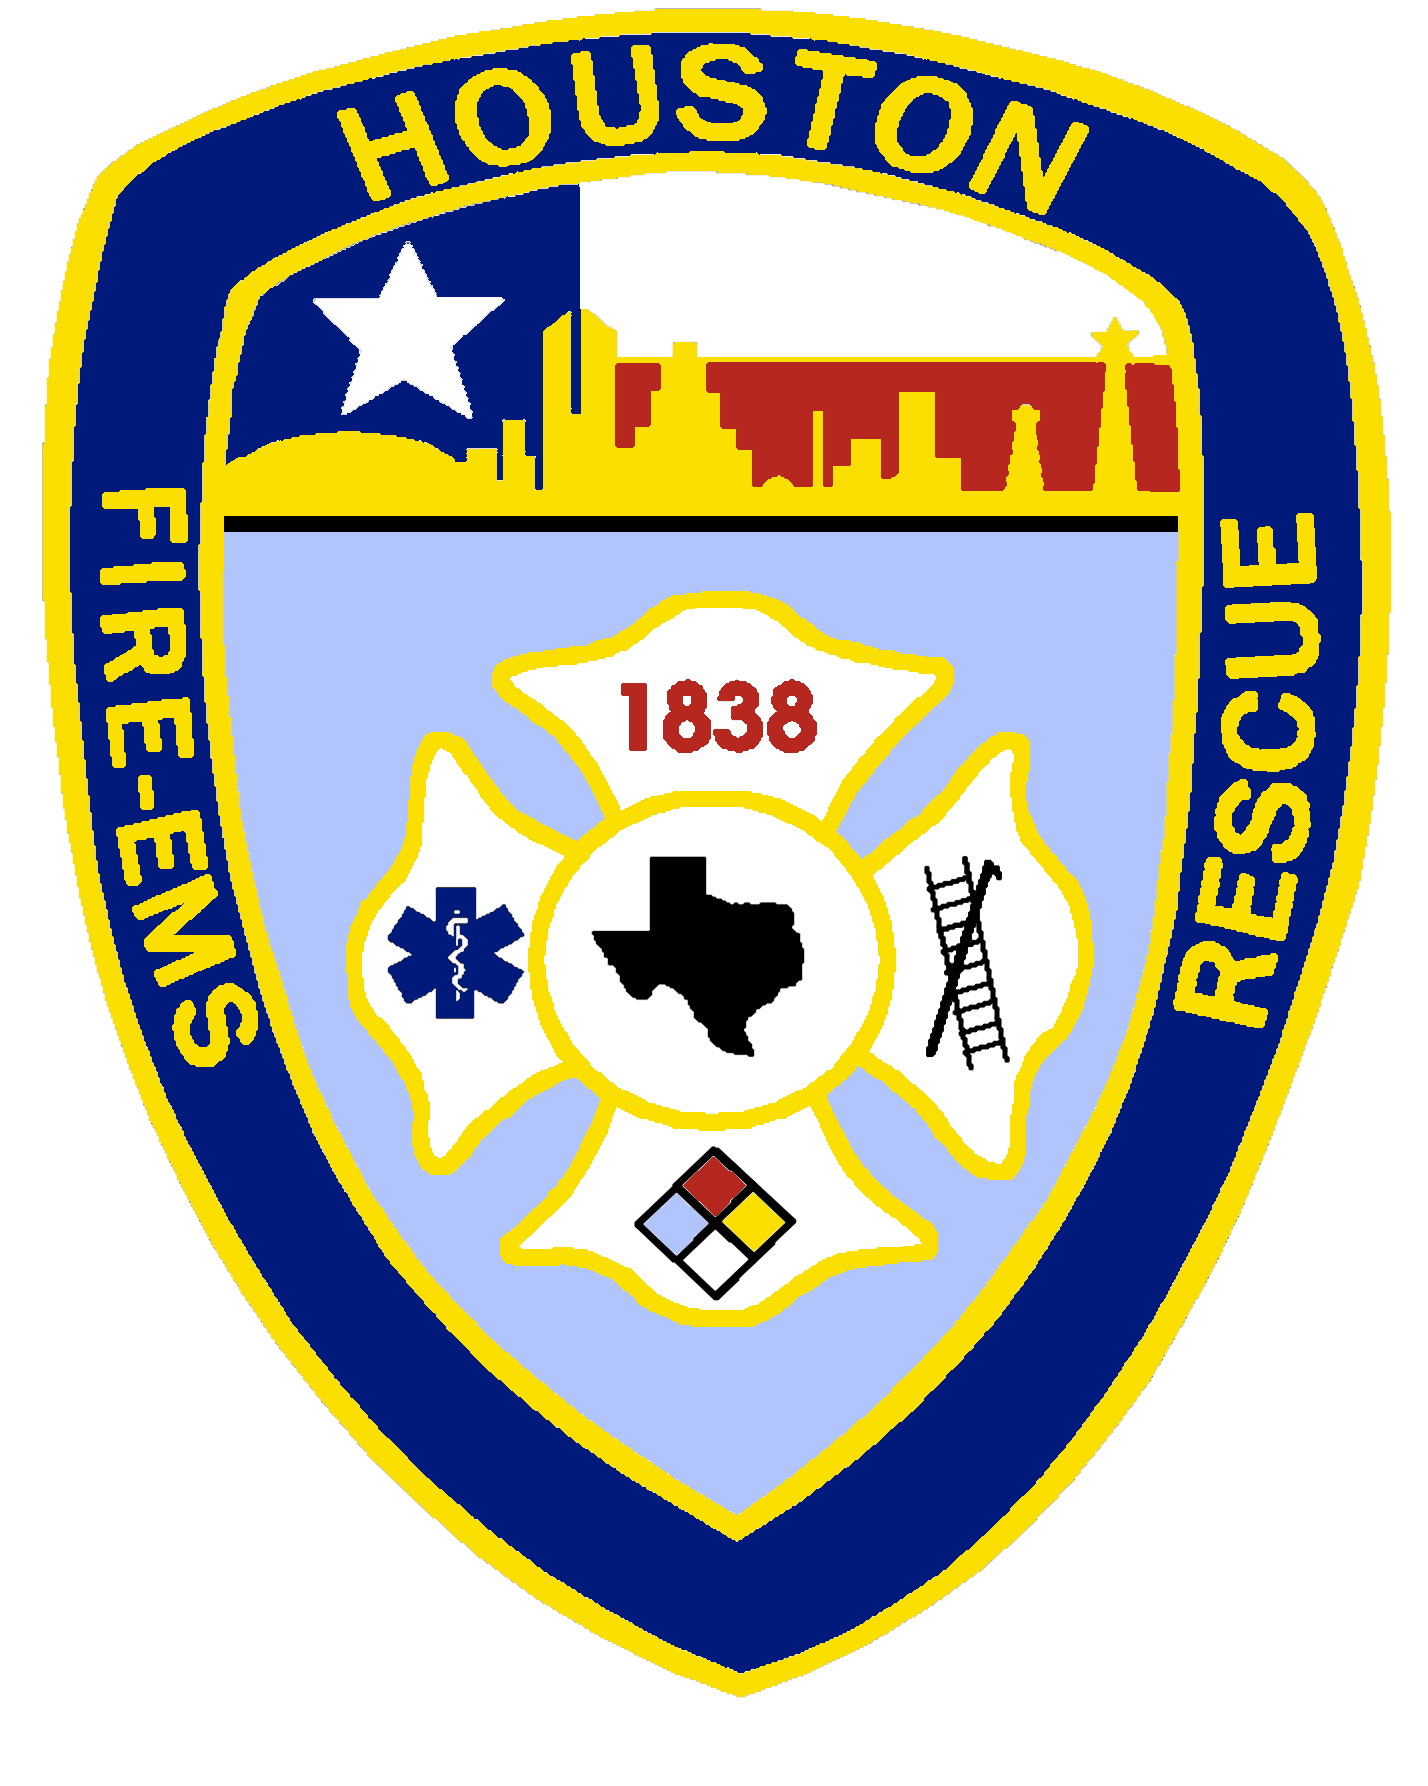 Houston City Council Approves Funding for Houston Fire Department